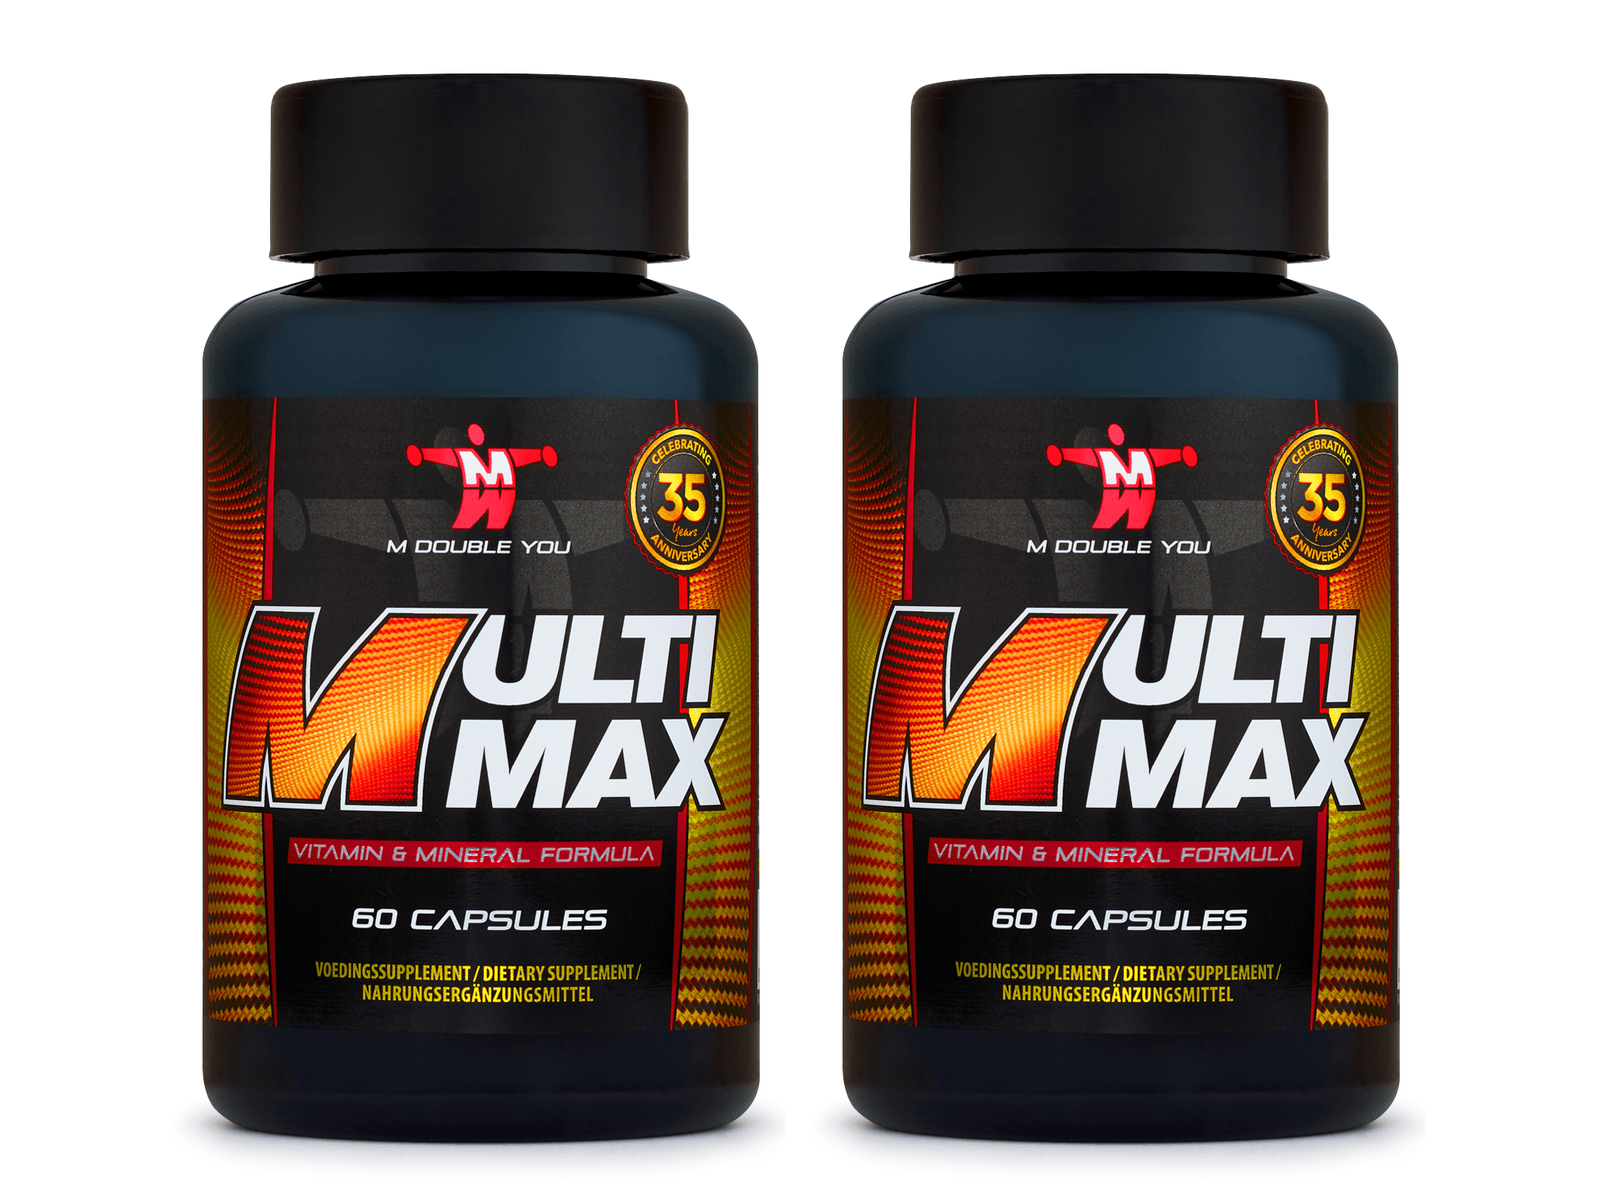 M DOUBLE YOU - Multi Max (60 capsules - 2-pack)